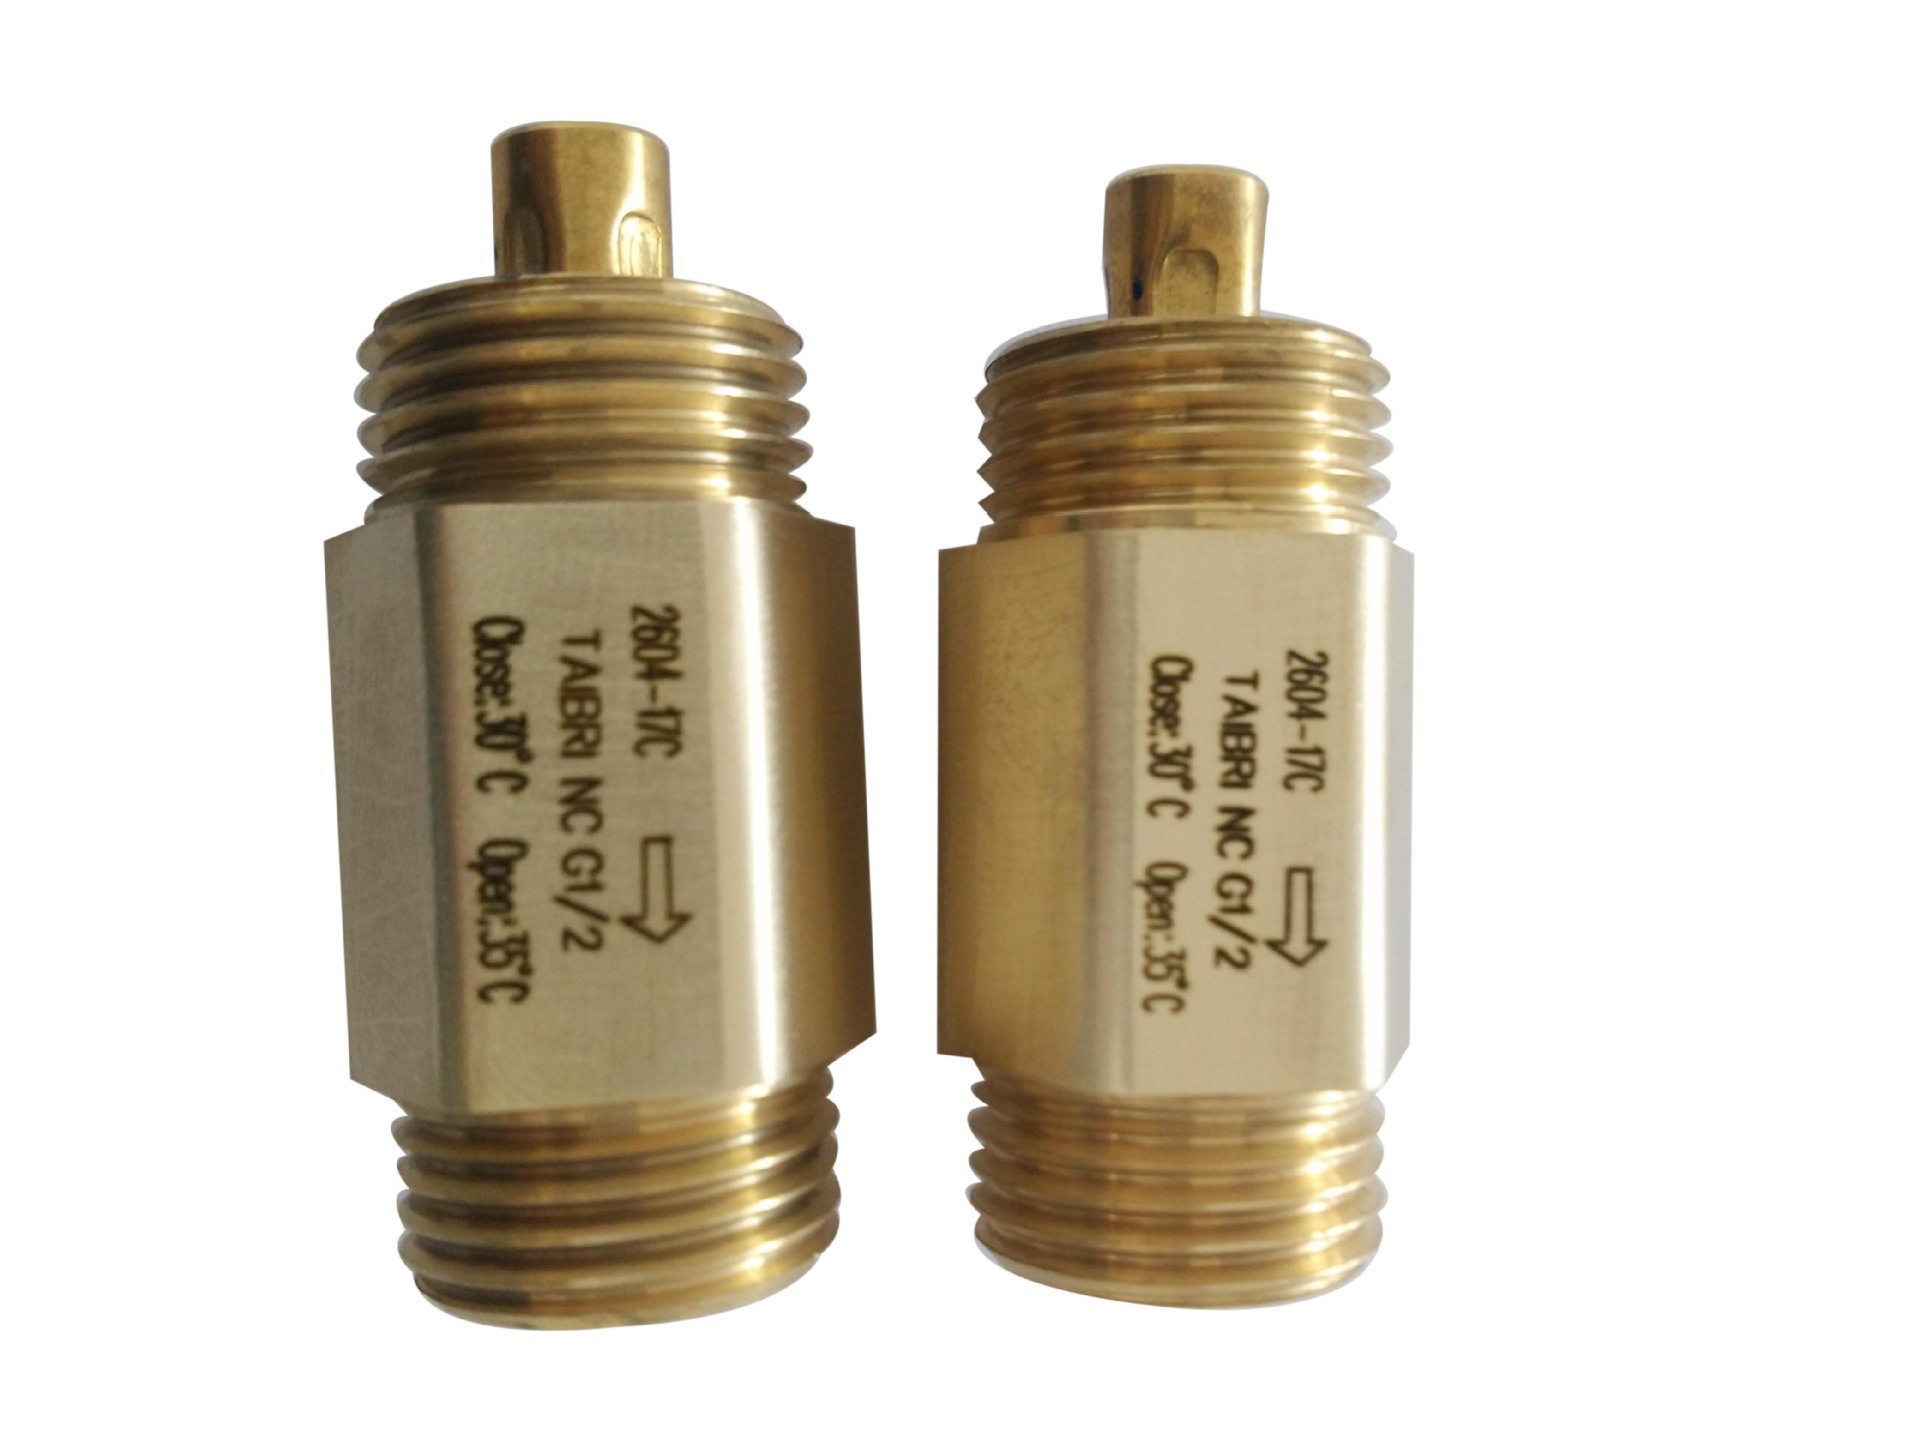 Scald protection valve